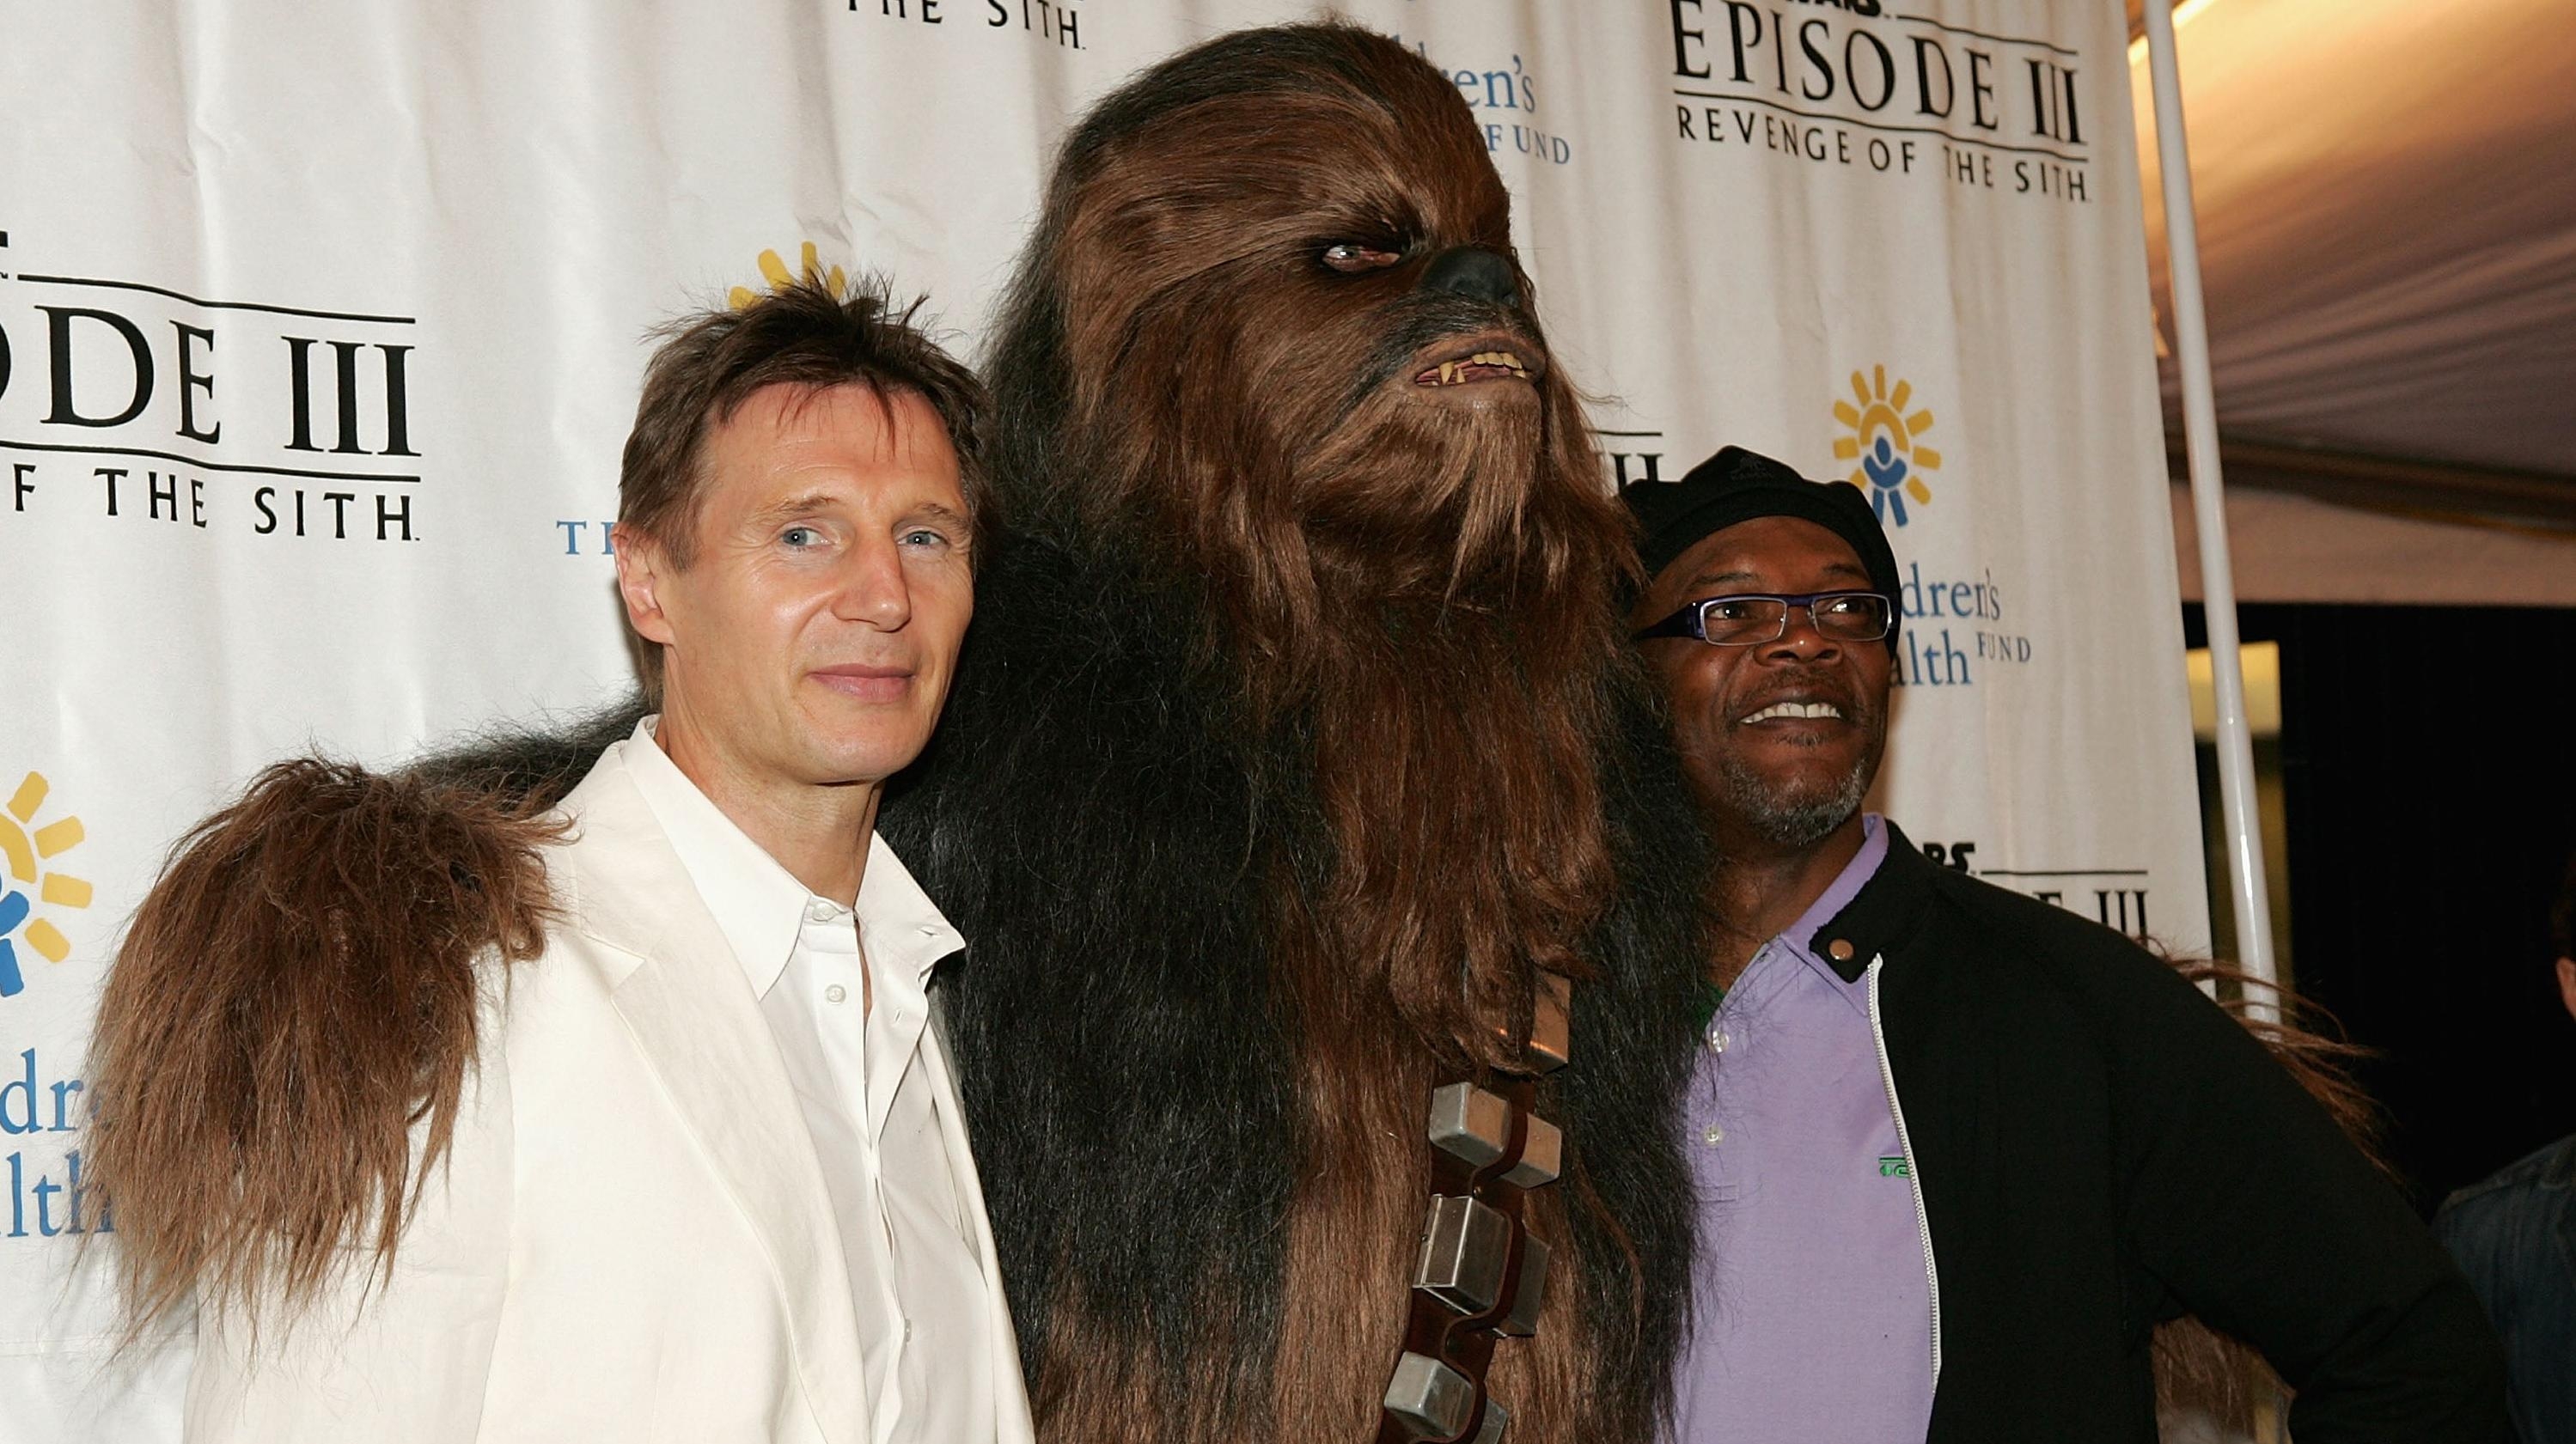 TV snob Liam Neeson says he would do another Star Wars movie